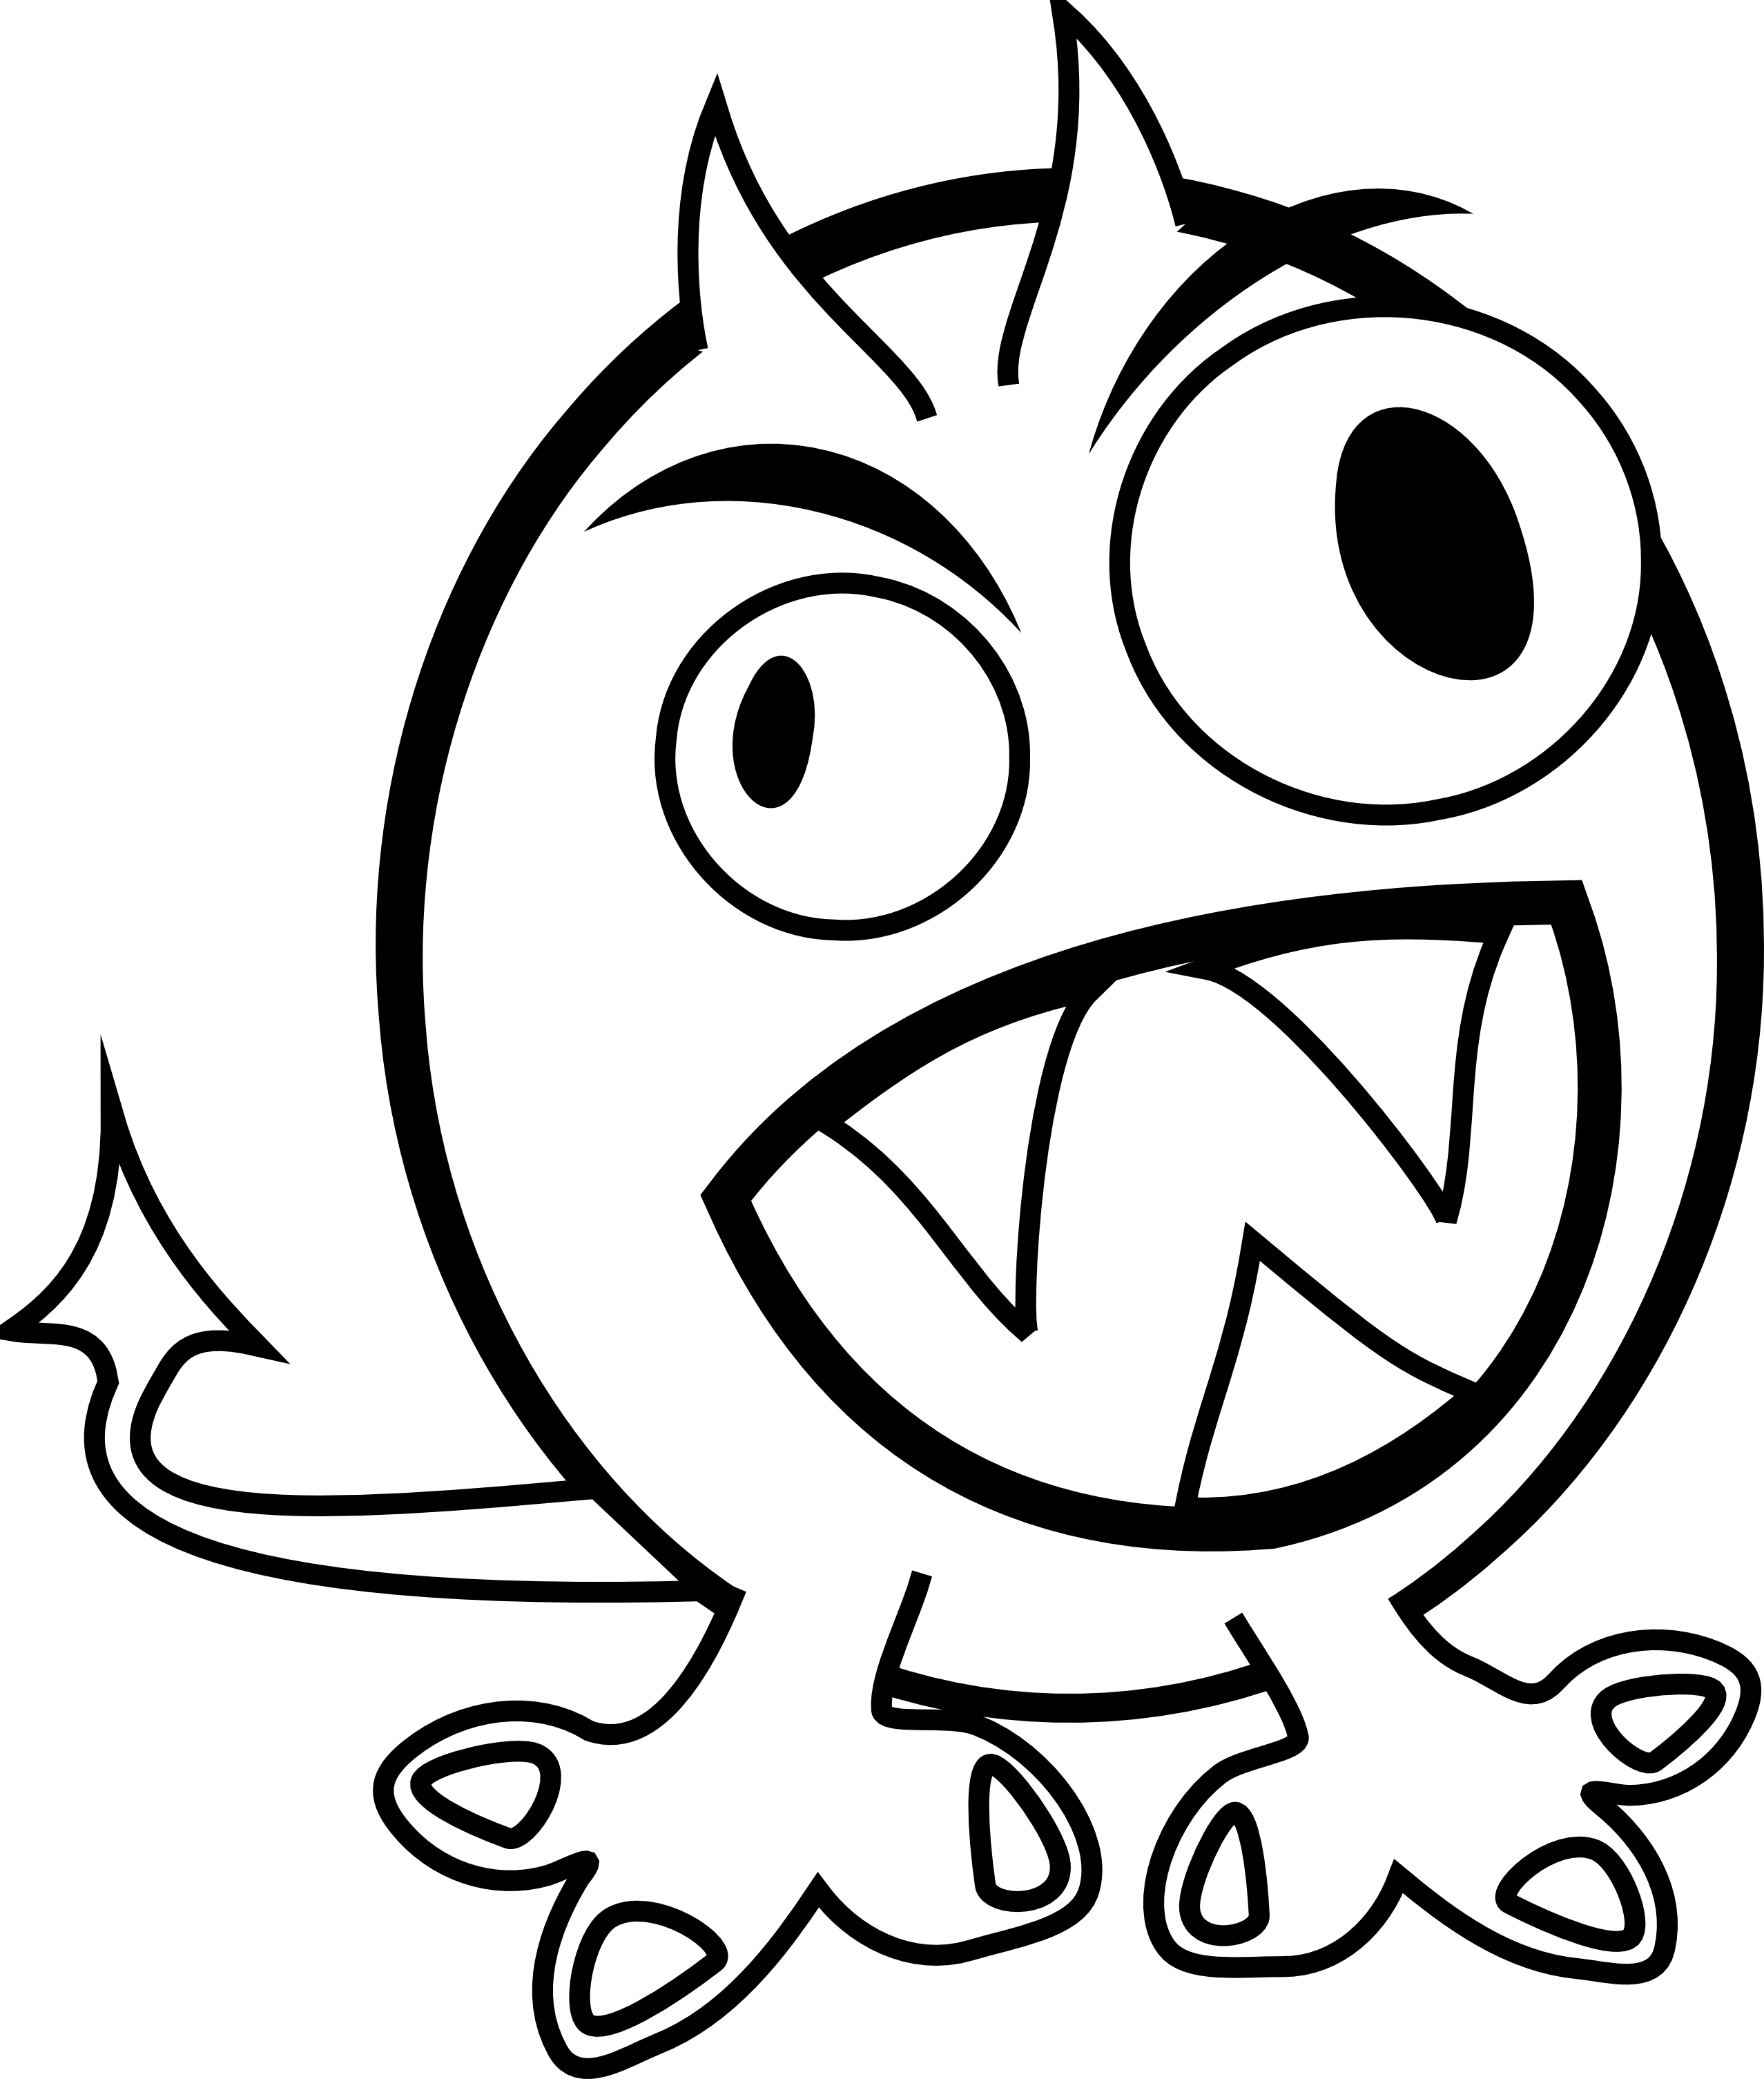 free black and white monster clipart - photo #8